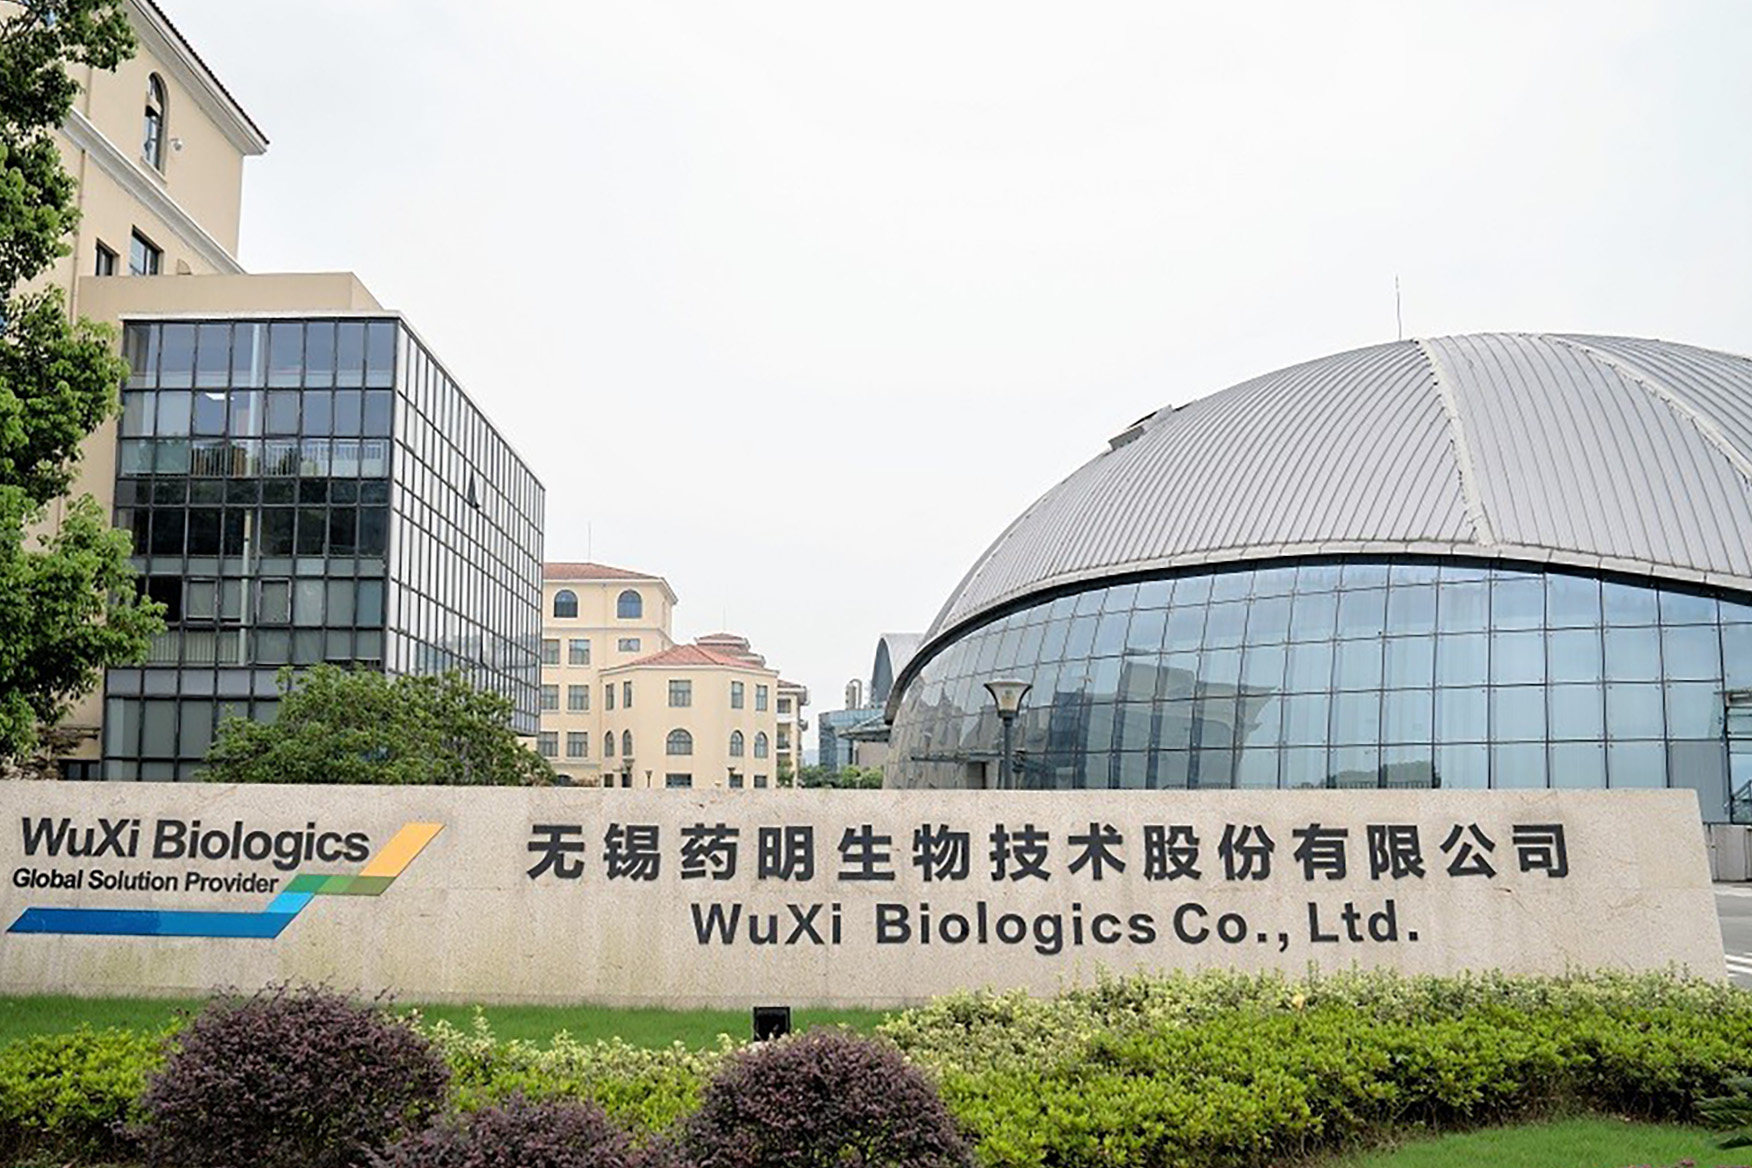 Wuxi Biologics holds a 60 per cent controlling stake in Wuxi XDC, which will remain its subsidiary after the spin-off. Photo: Wuxi Biologics
